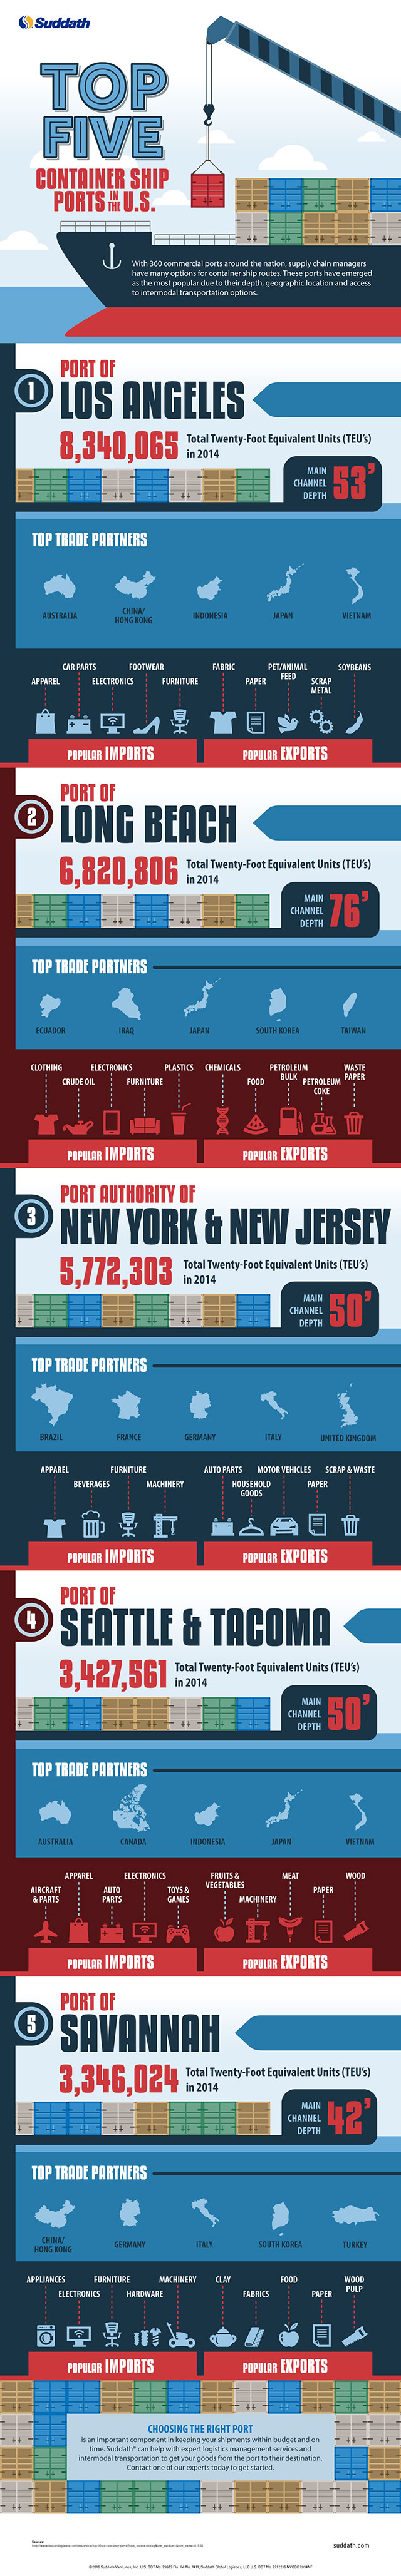 Top Five Container Ship Ports in the U.S.